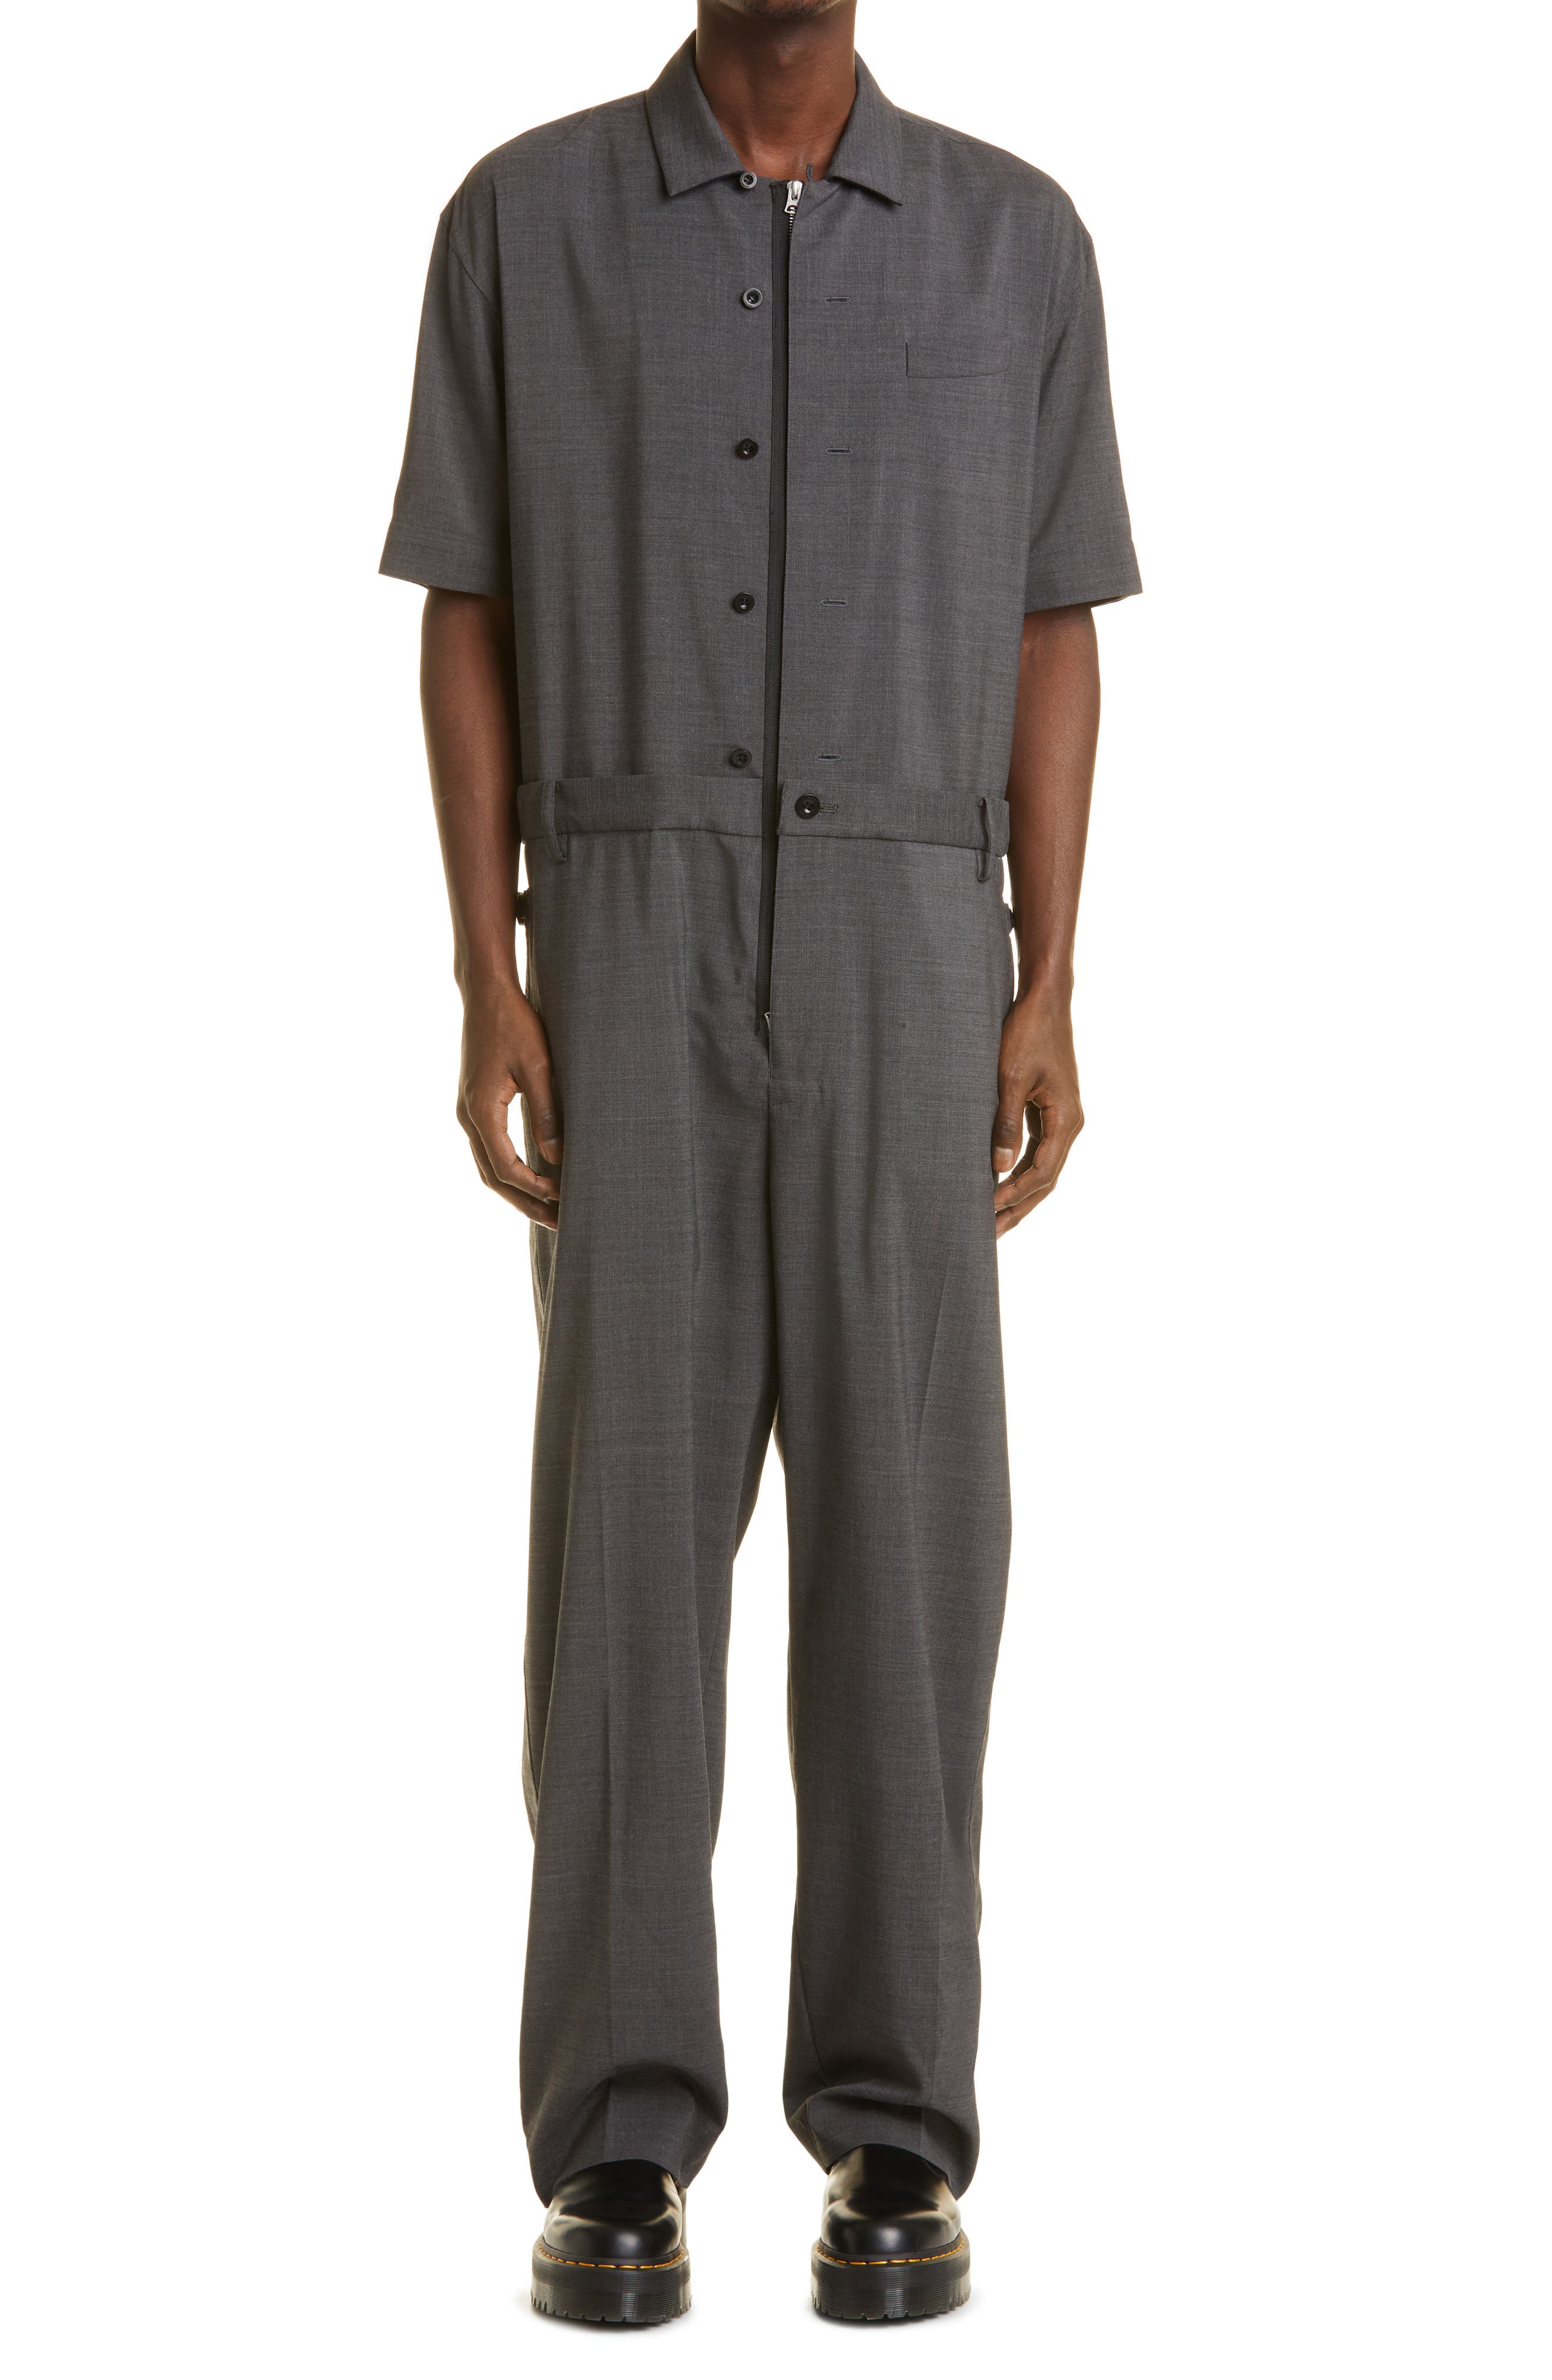 Sacai Suiting Jumpsuit in Grey at Nordstrom, Size 2